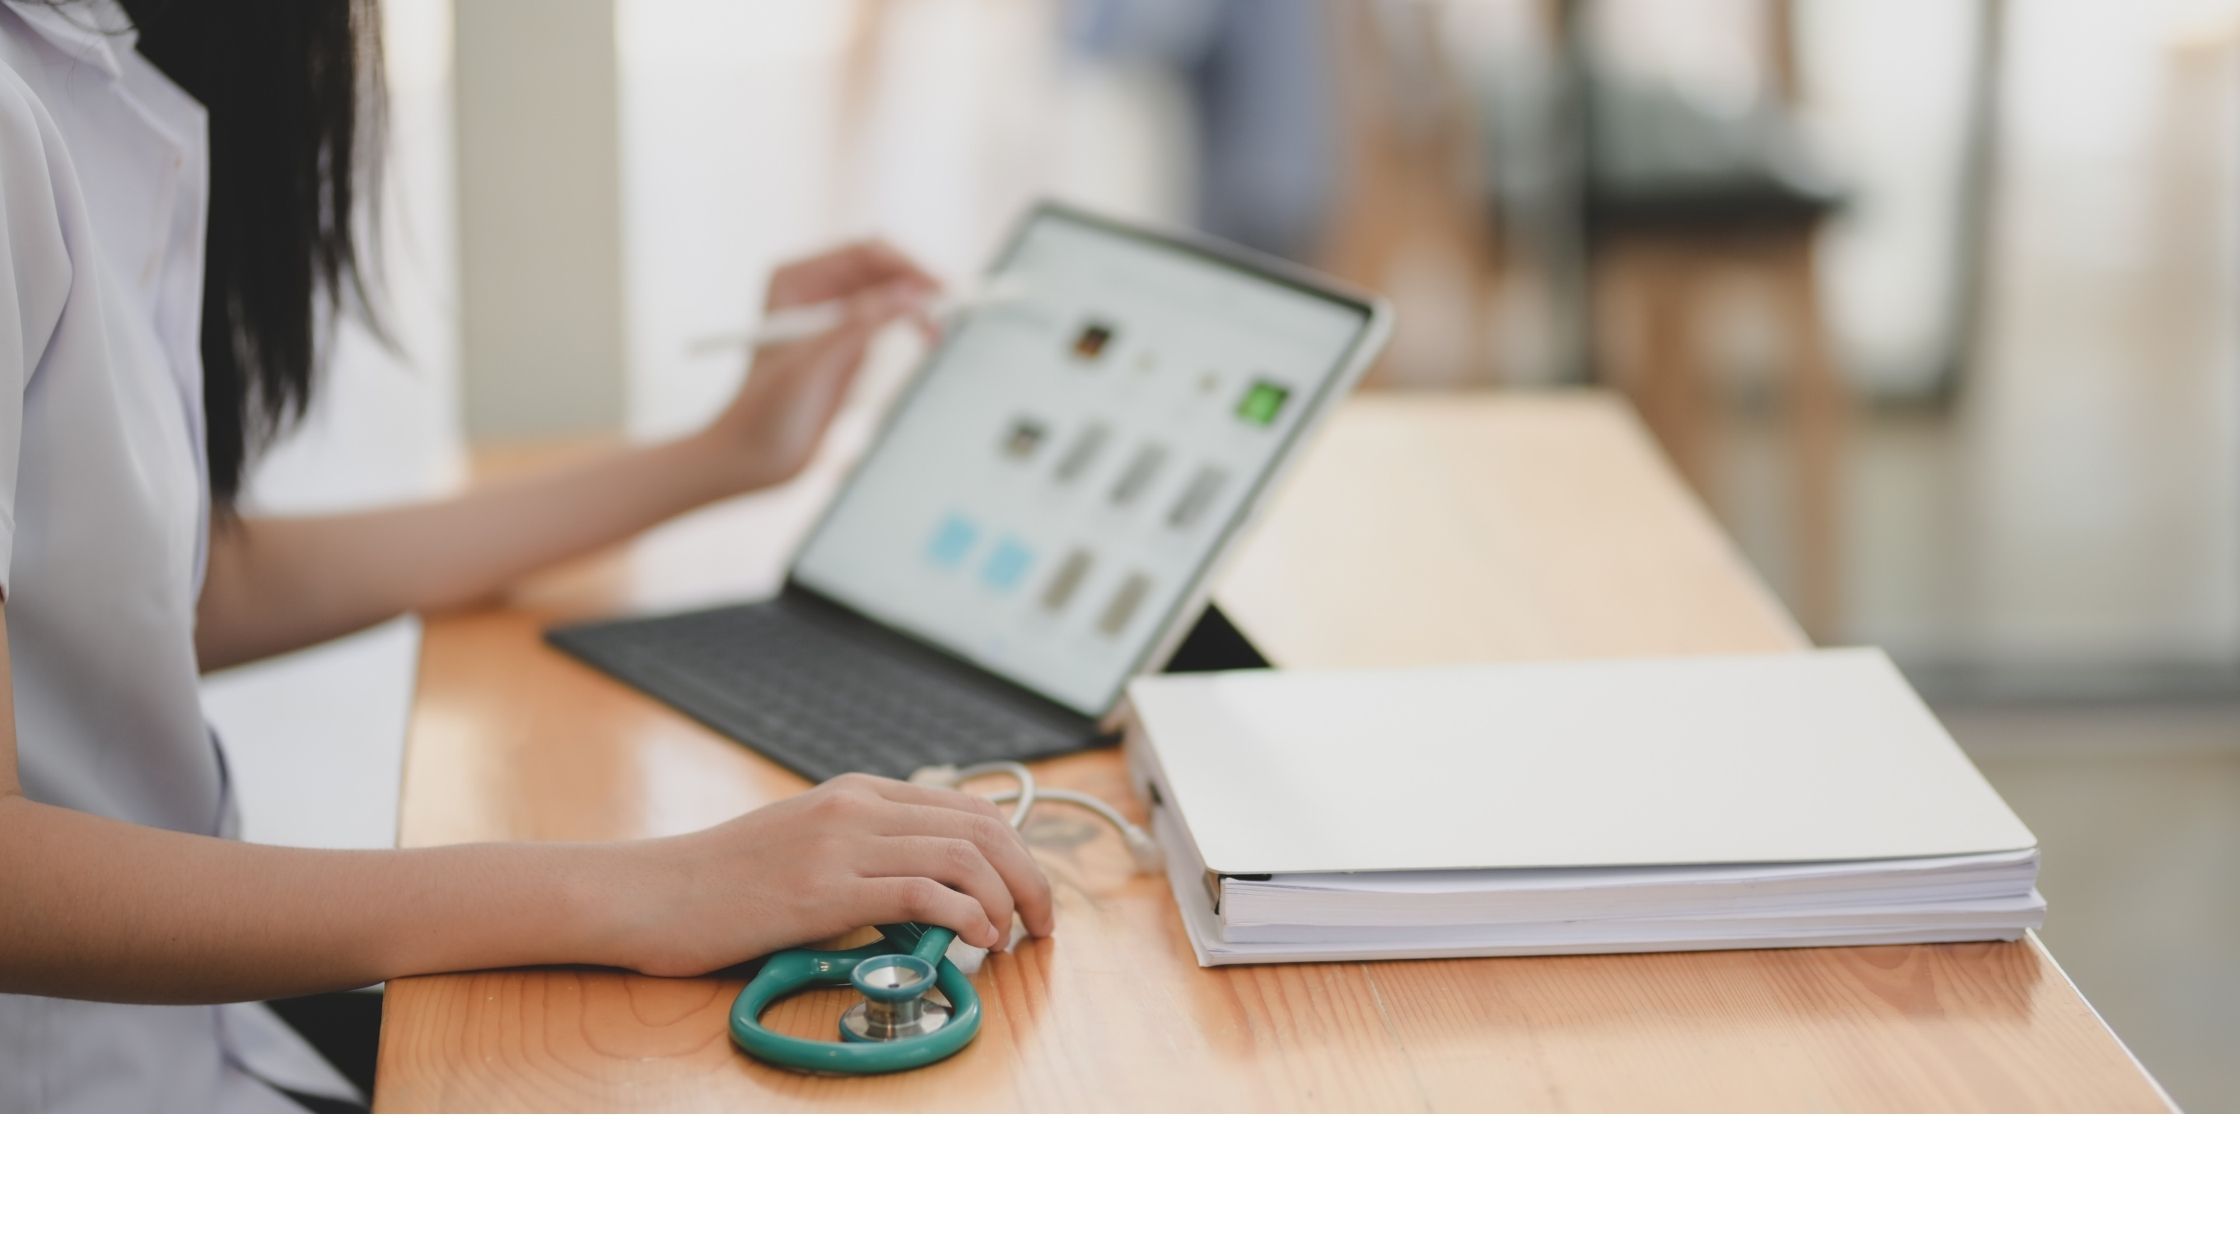 Nurse practitioner using EHR telehealth platform to schedule virtual patient care with a laptop